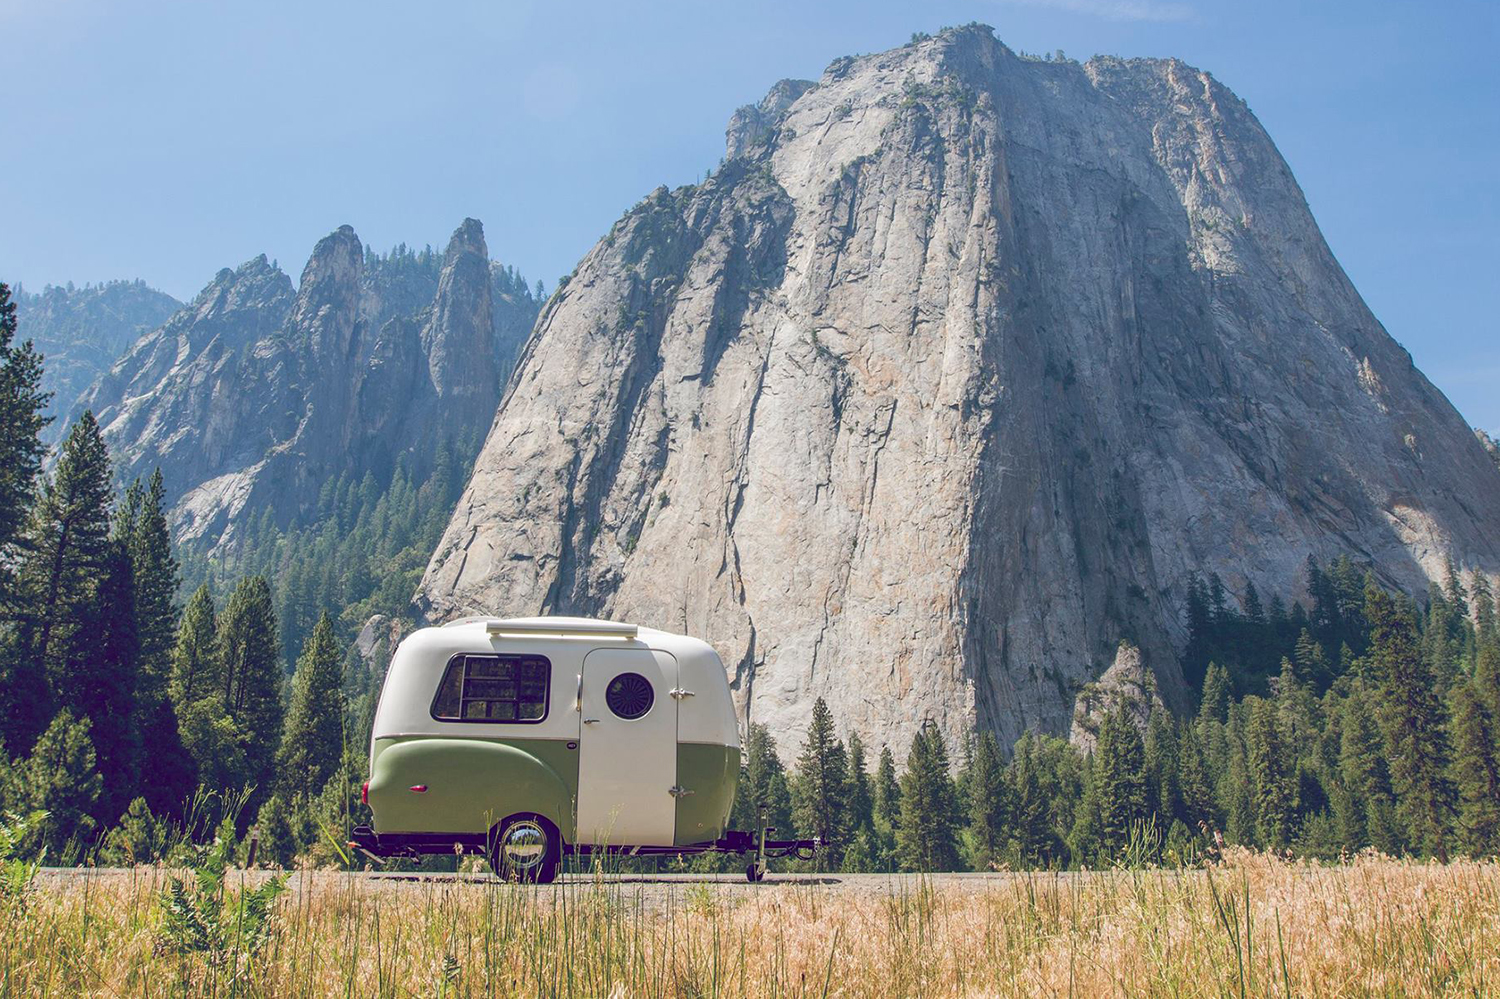 Happier Camper vintage-inspired travel trailer against a mountain background.